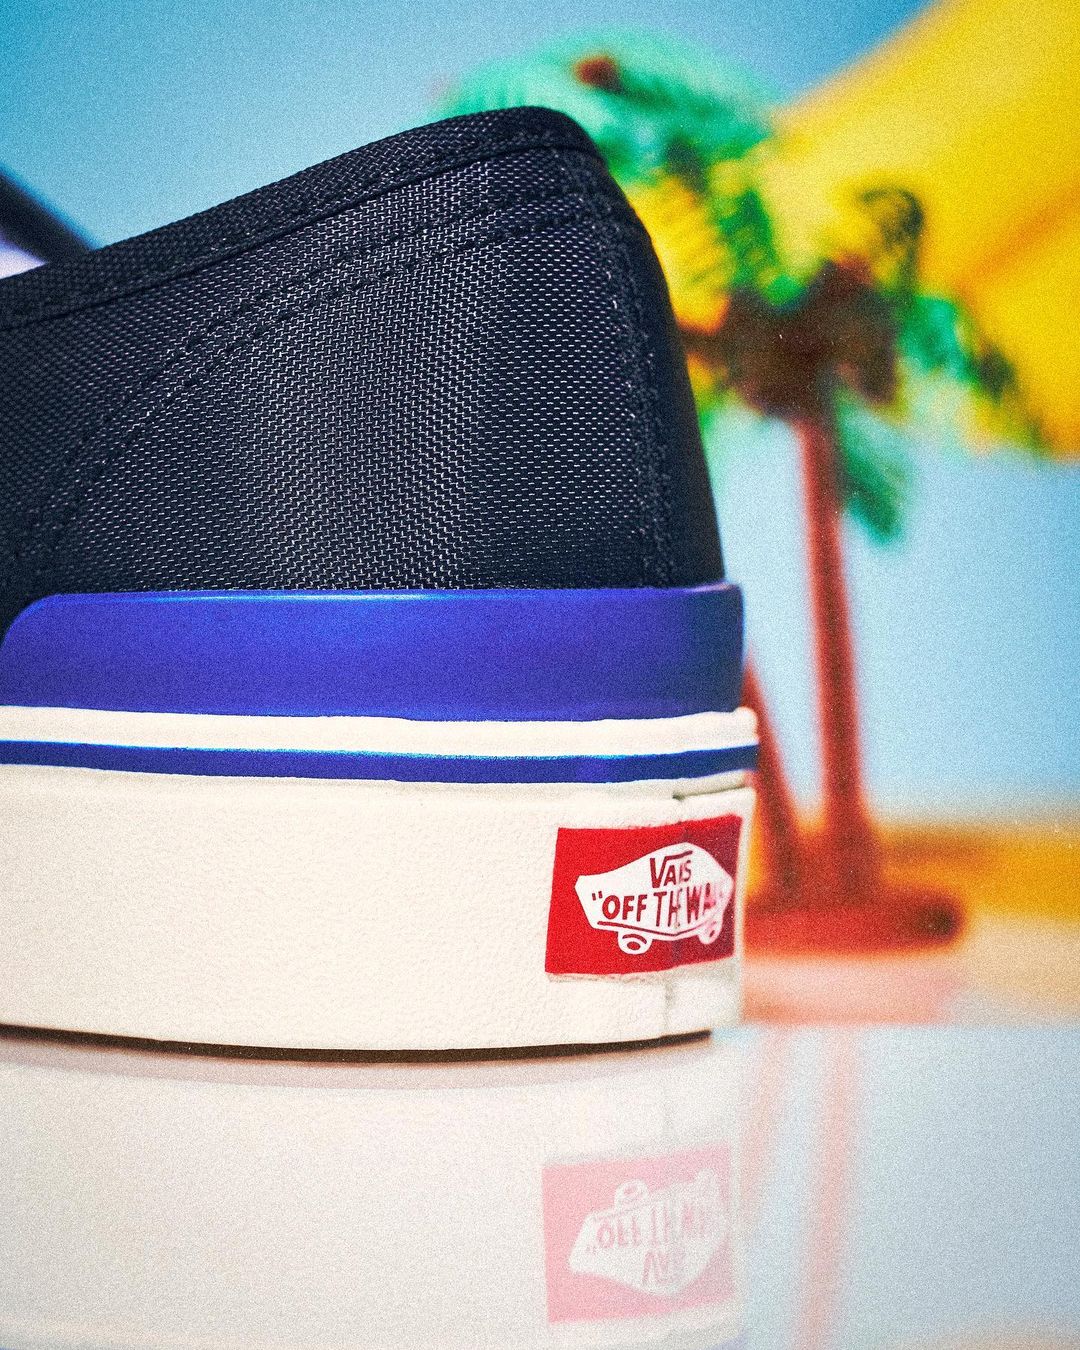 tripster-vans-comfycush-authentic-release-20230325